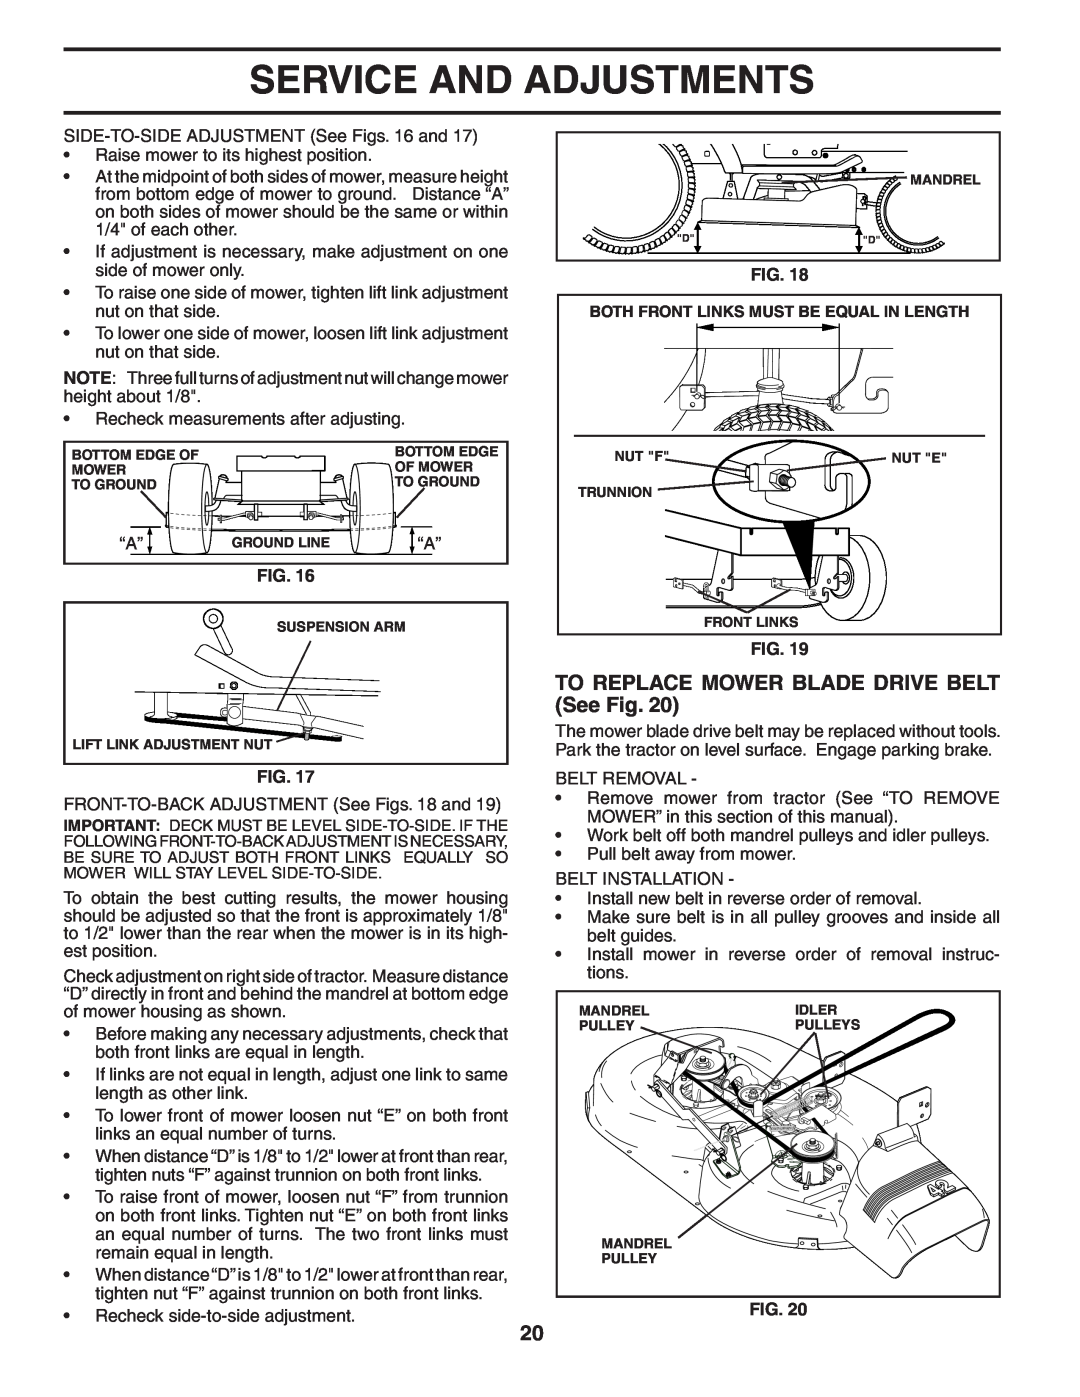 Poulan PB185H42LT manual TO REPLACE MOWER BLADE DRIVE BELT See Fig, Service And Adjustments 